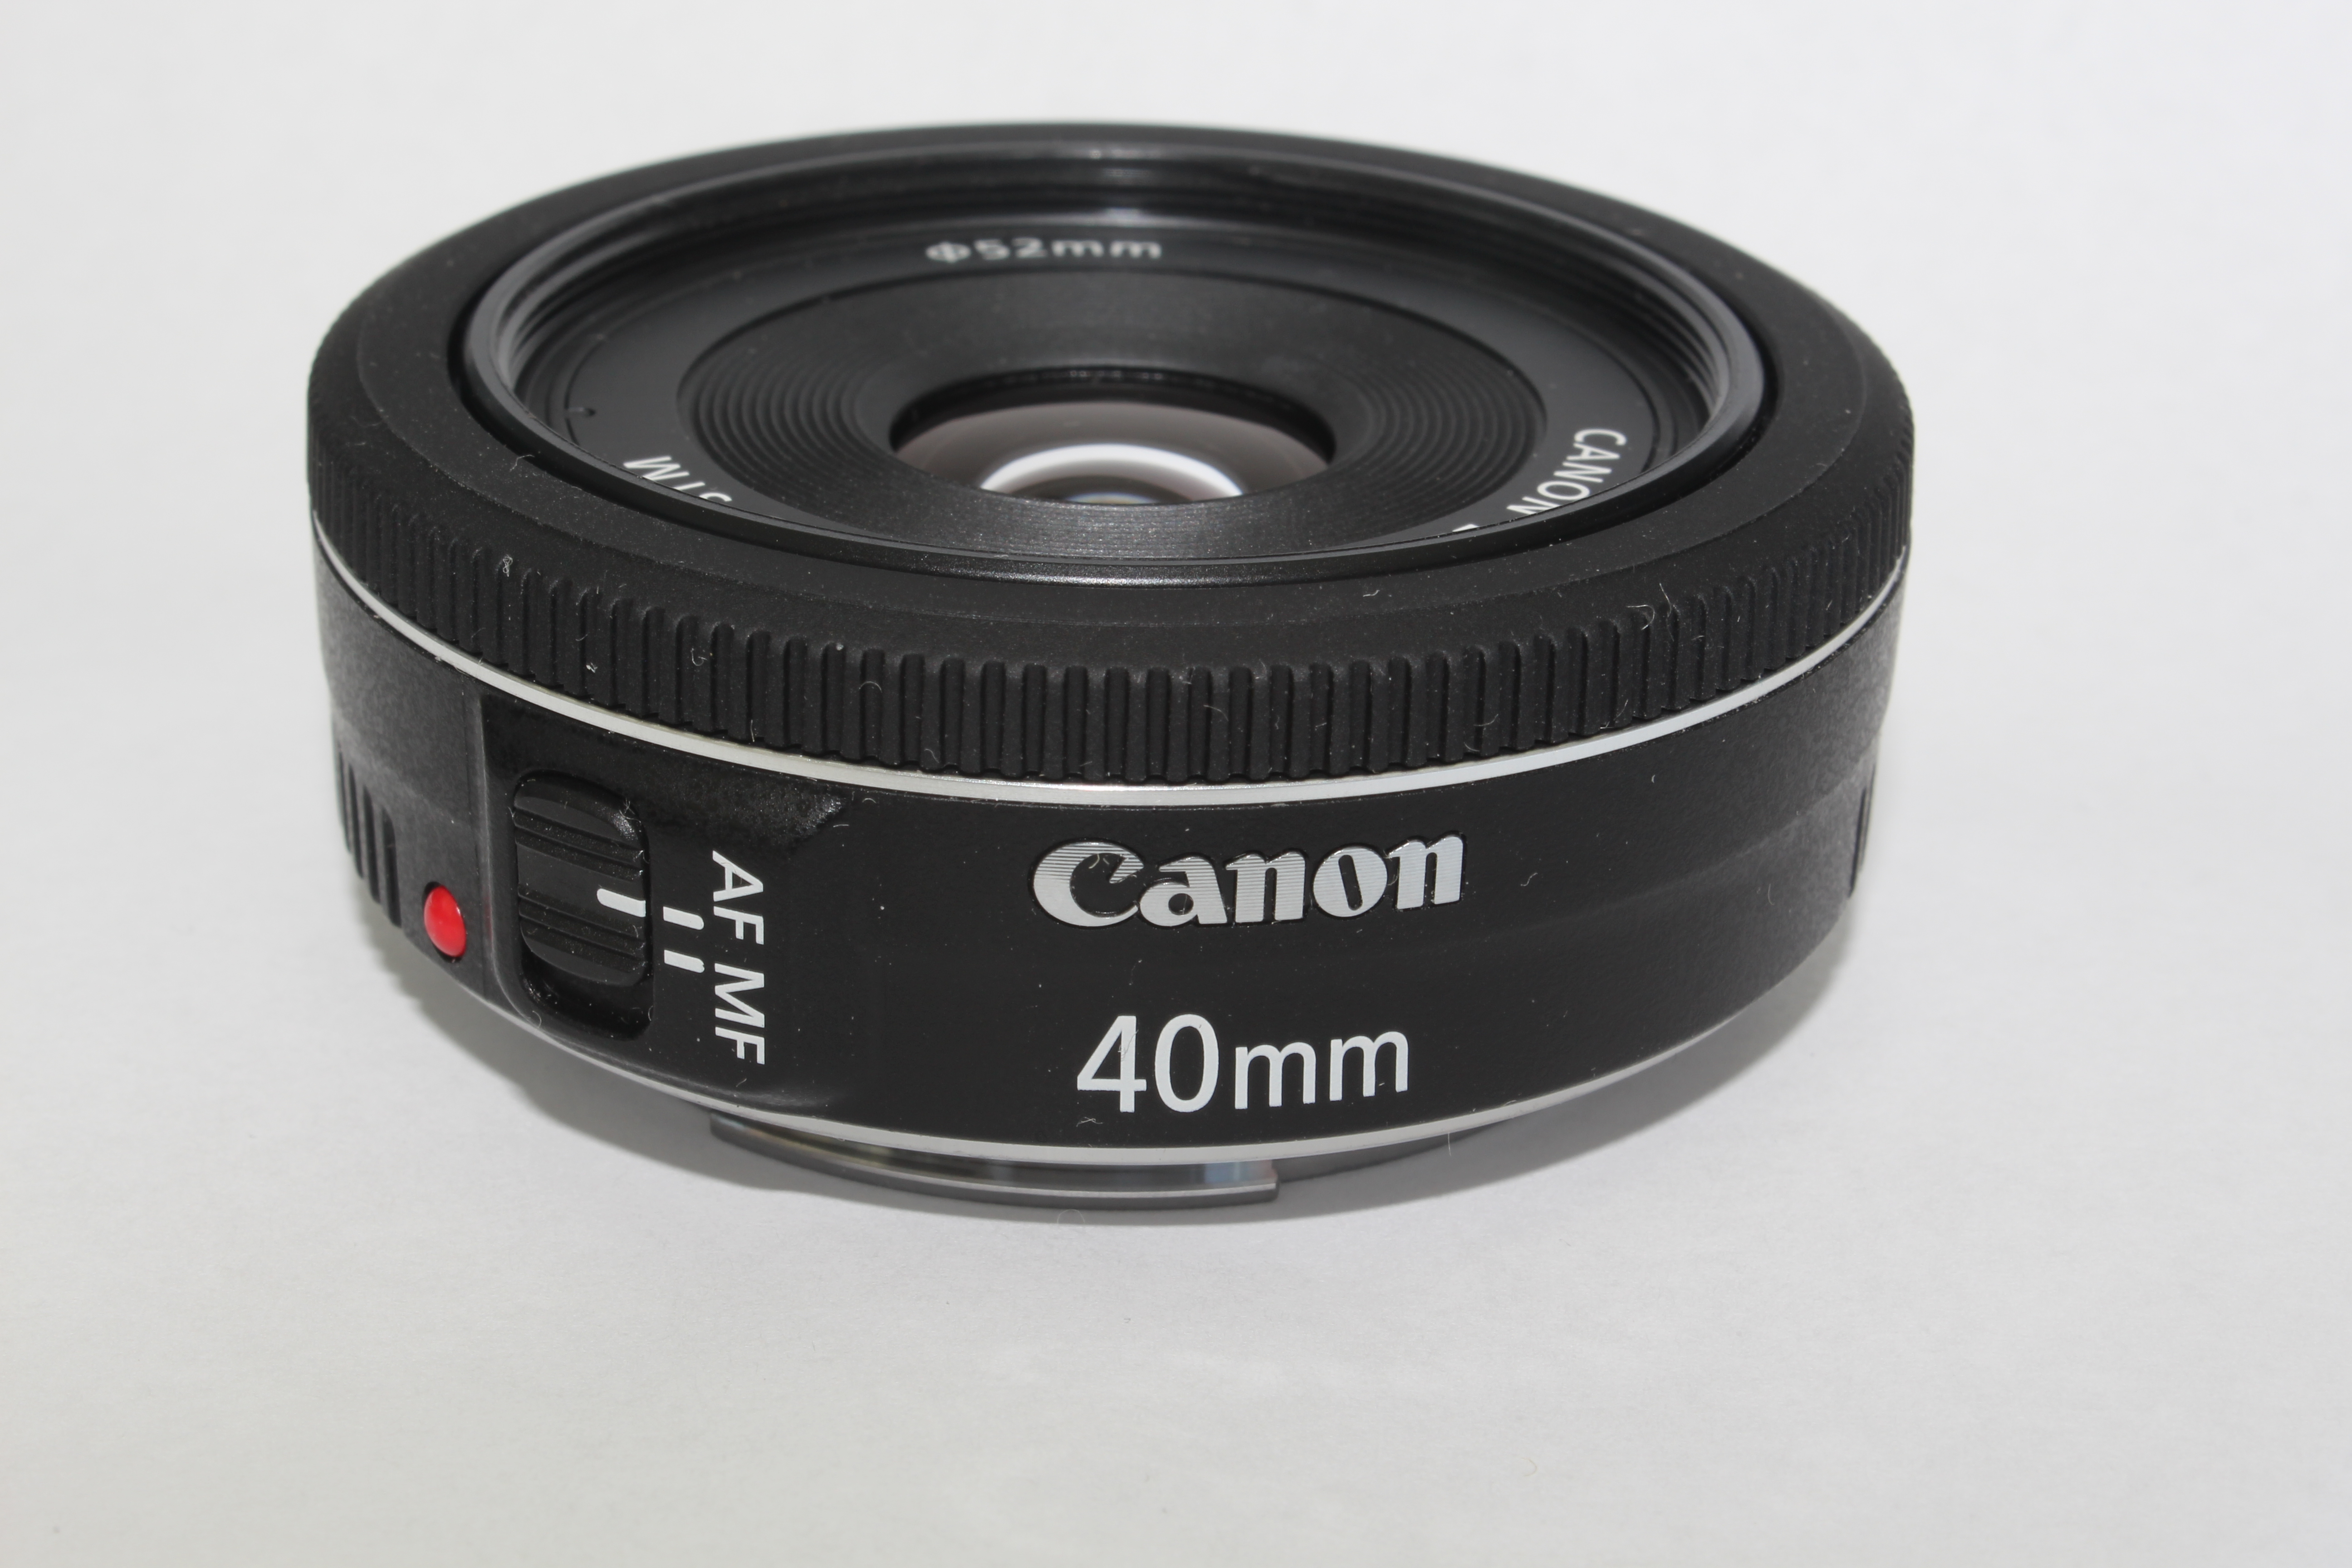 Объективы 40mm. Canon ef40 f2.8 STM. Canon 40mm 2.8 STM. Canon EF 40mm f/2.8 STM. Canon EF 40 STM.